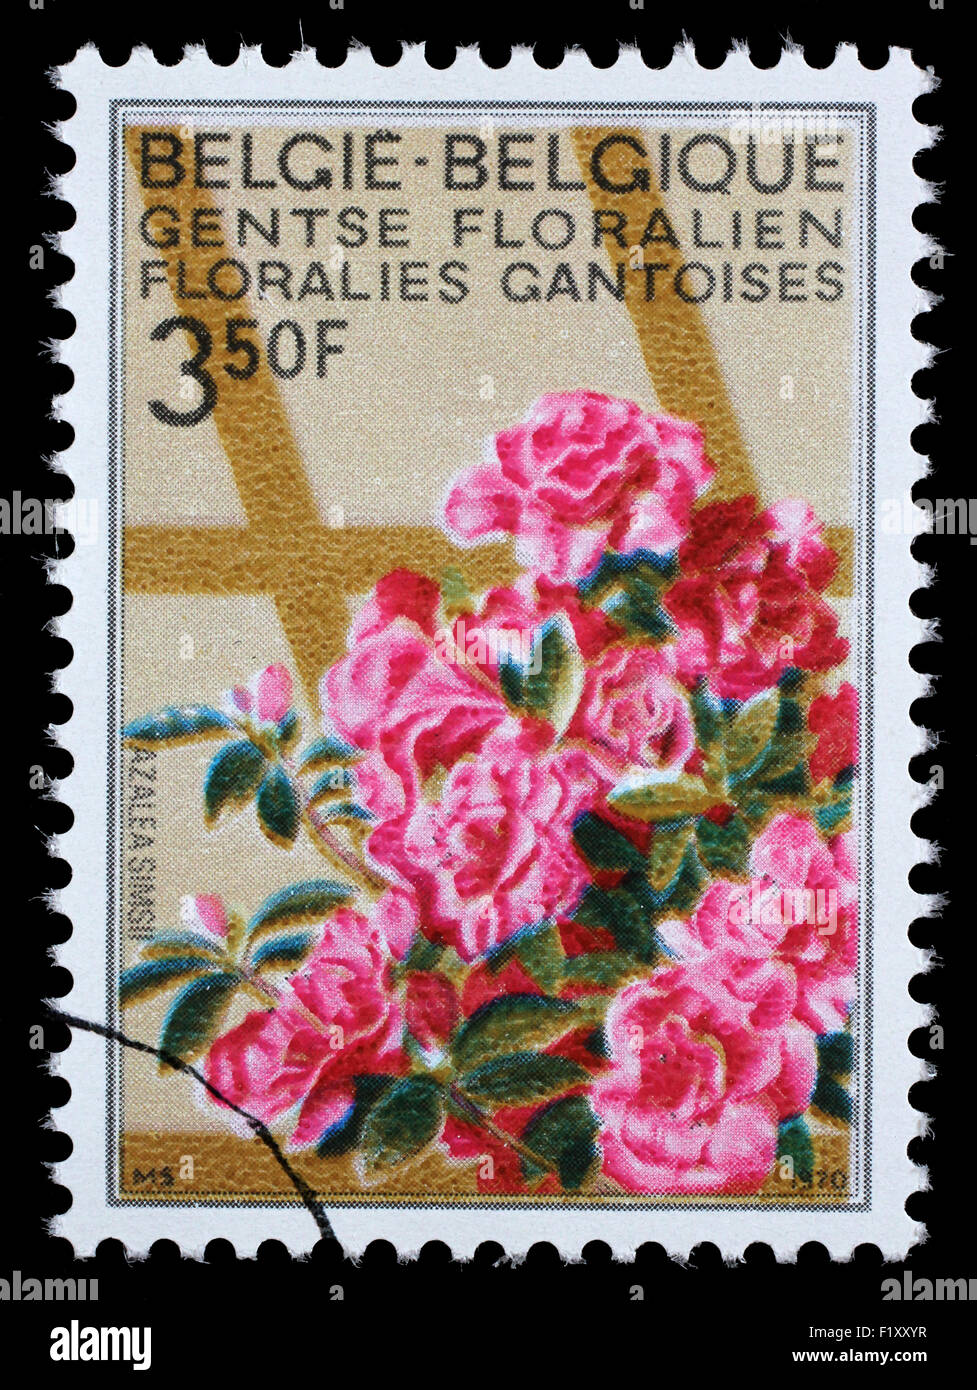 BELGIUM - CIRCA 1970: A stamp printed in Belgium from the Ghent Flower Show issue shows Azaleas, circa 1970. Stock Photo